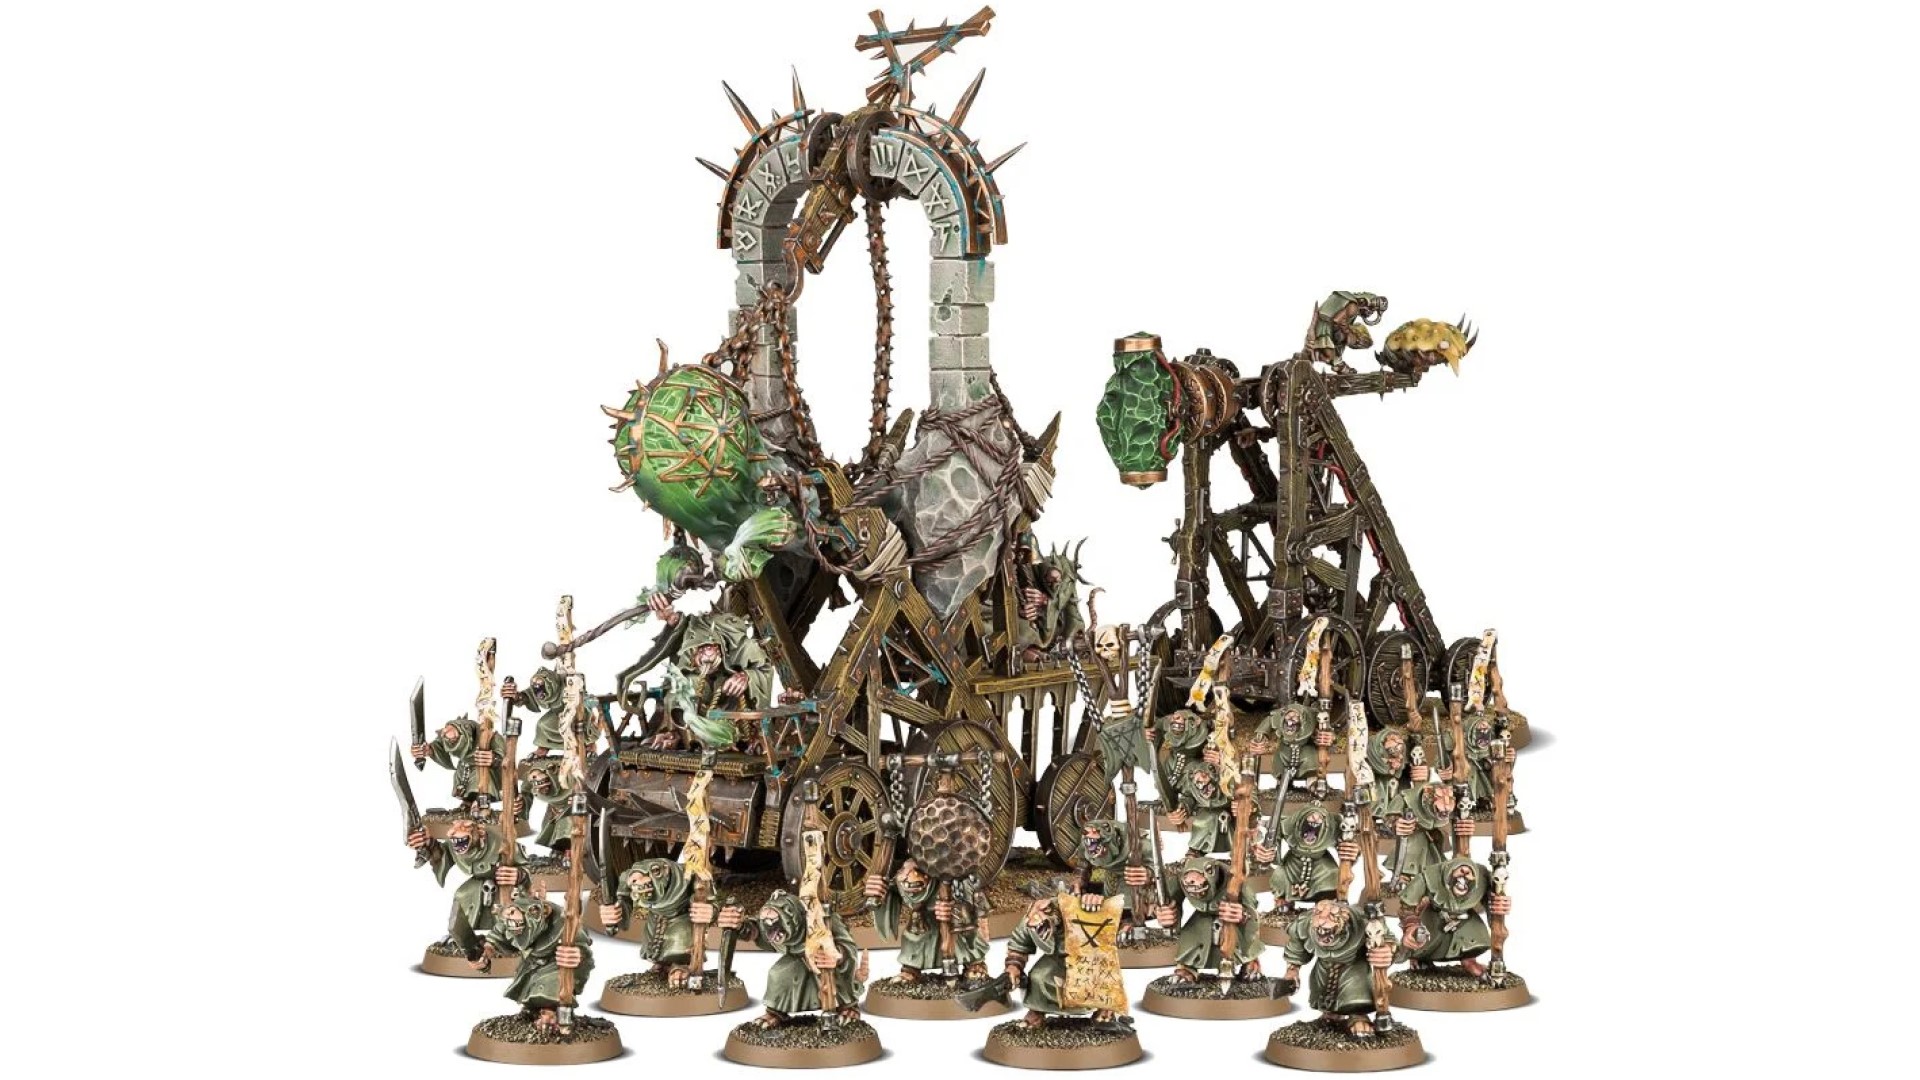 AOS SKAVEN ARMY MANY UNITS TO CHOOSE FROM WARHAMMER 